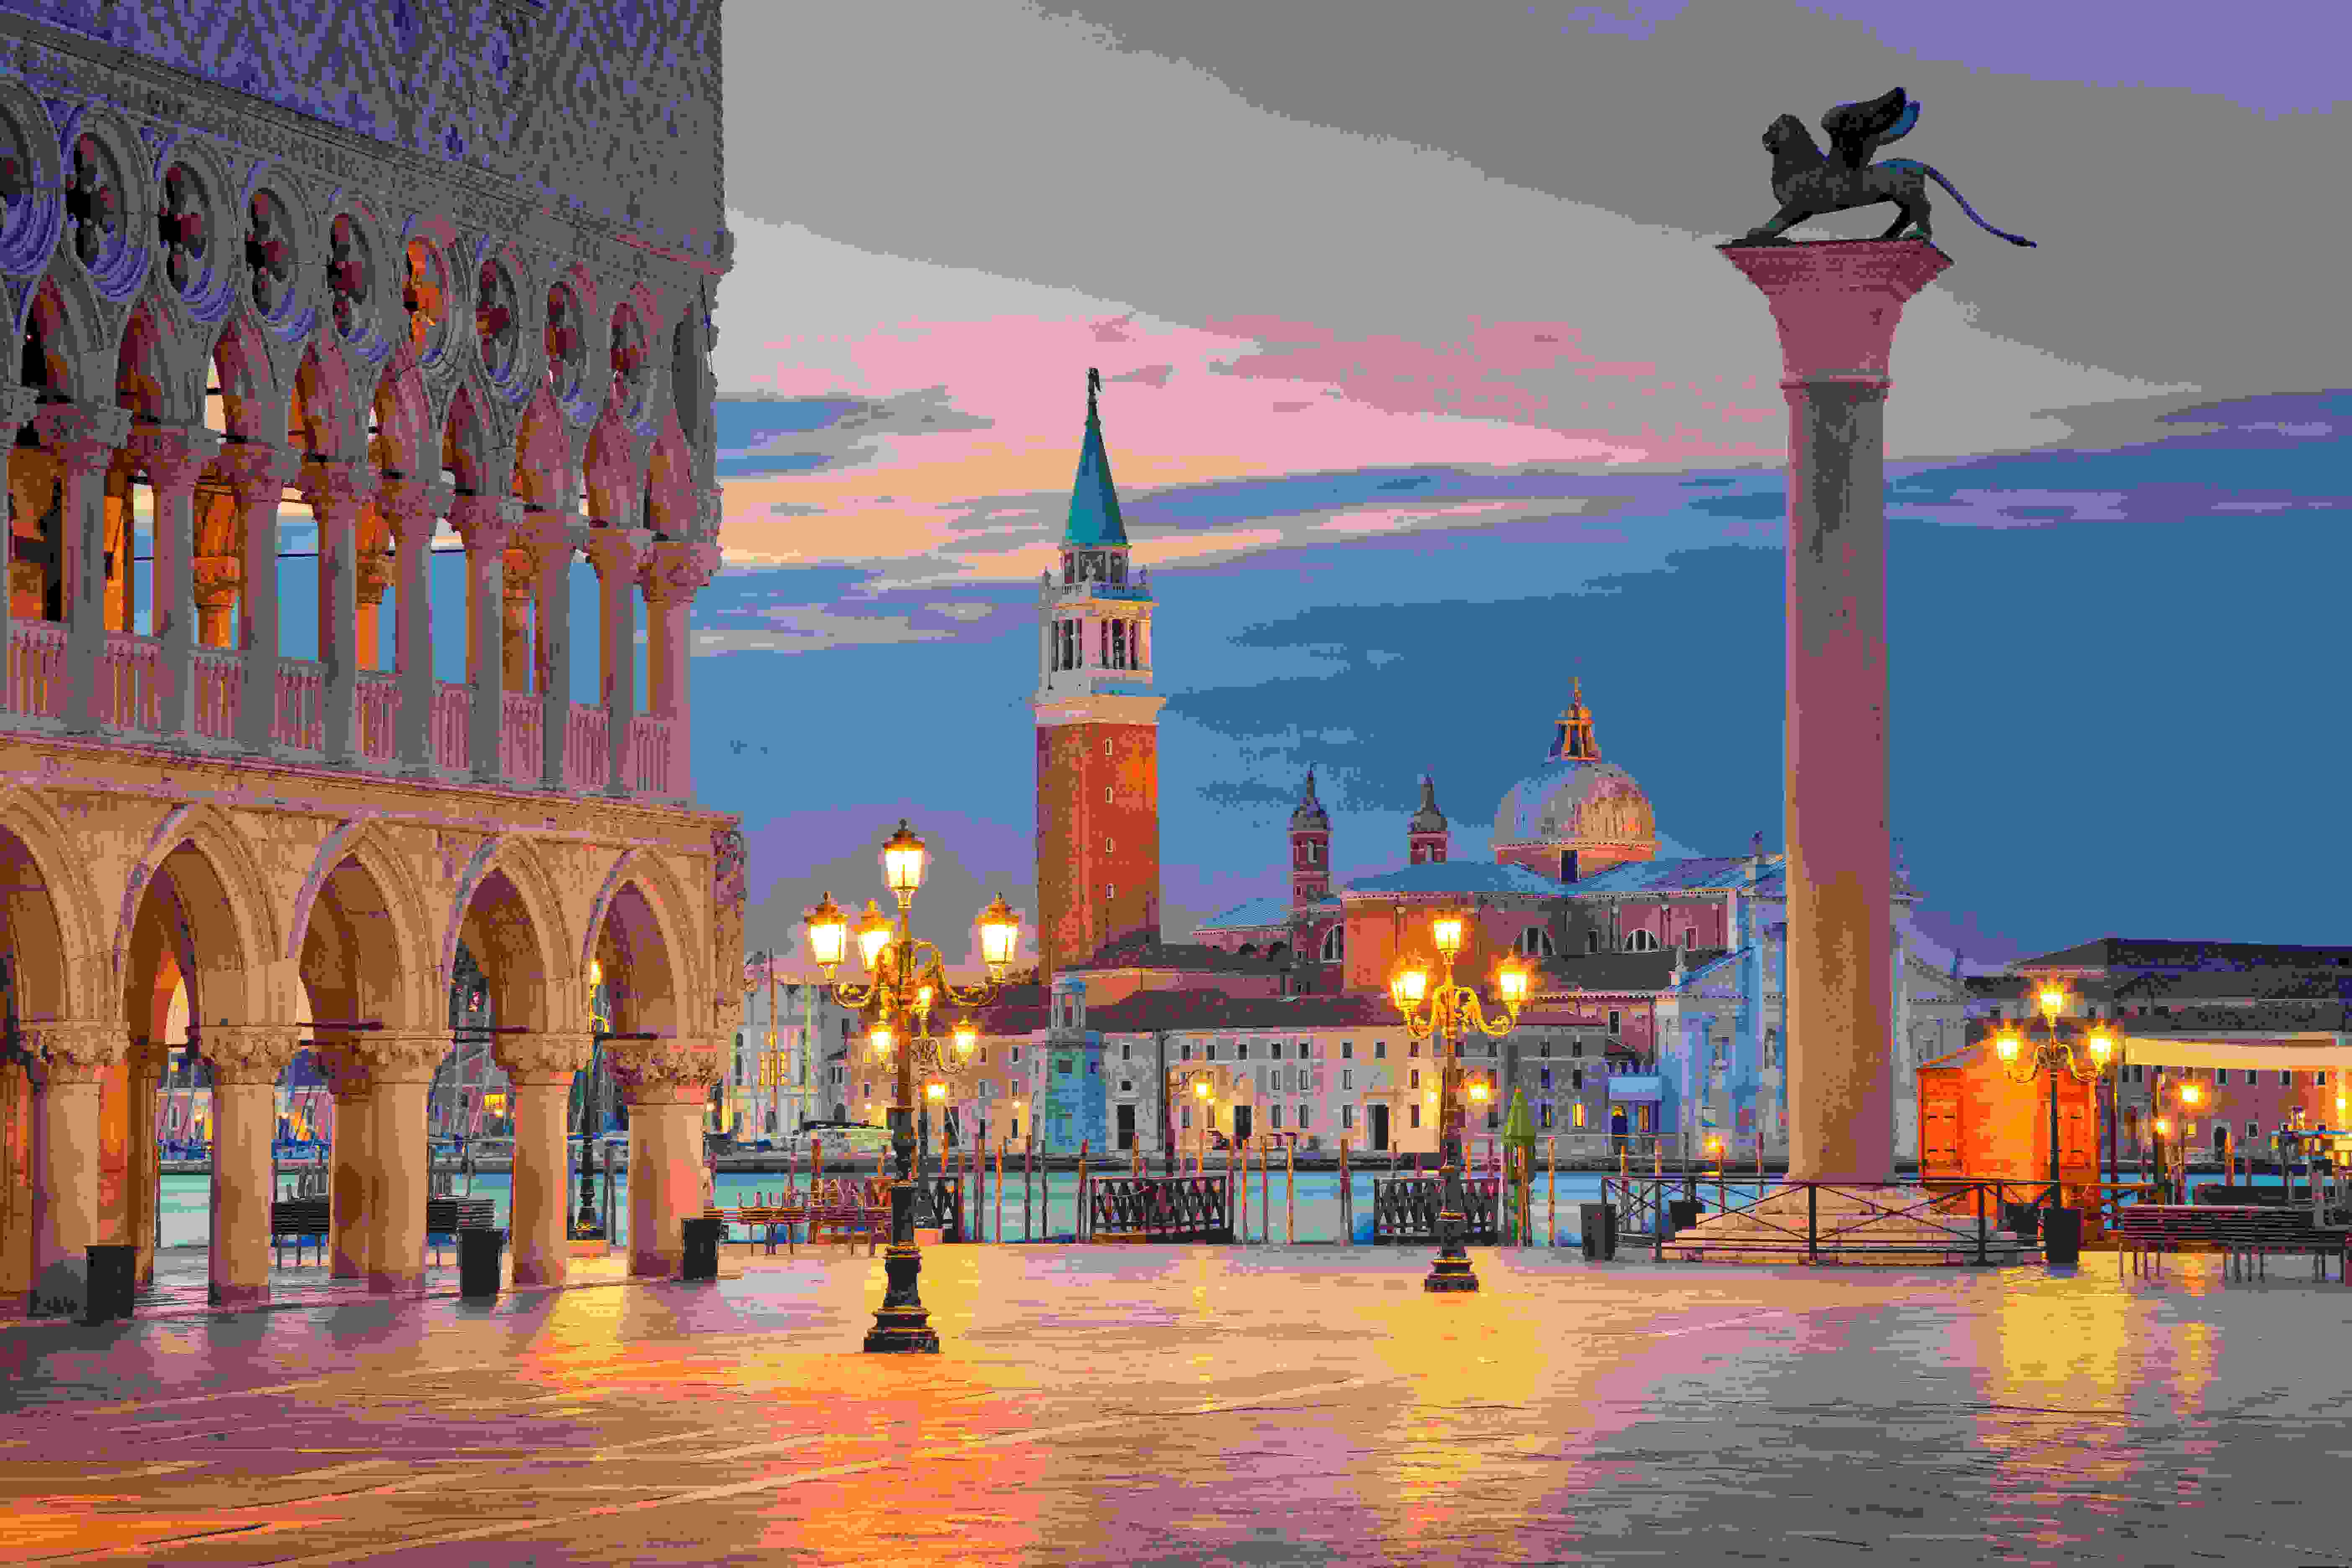 Sunset at St. Mark's Square in Venice, Italy | Hotel Excelsior Venice Lido Resort